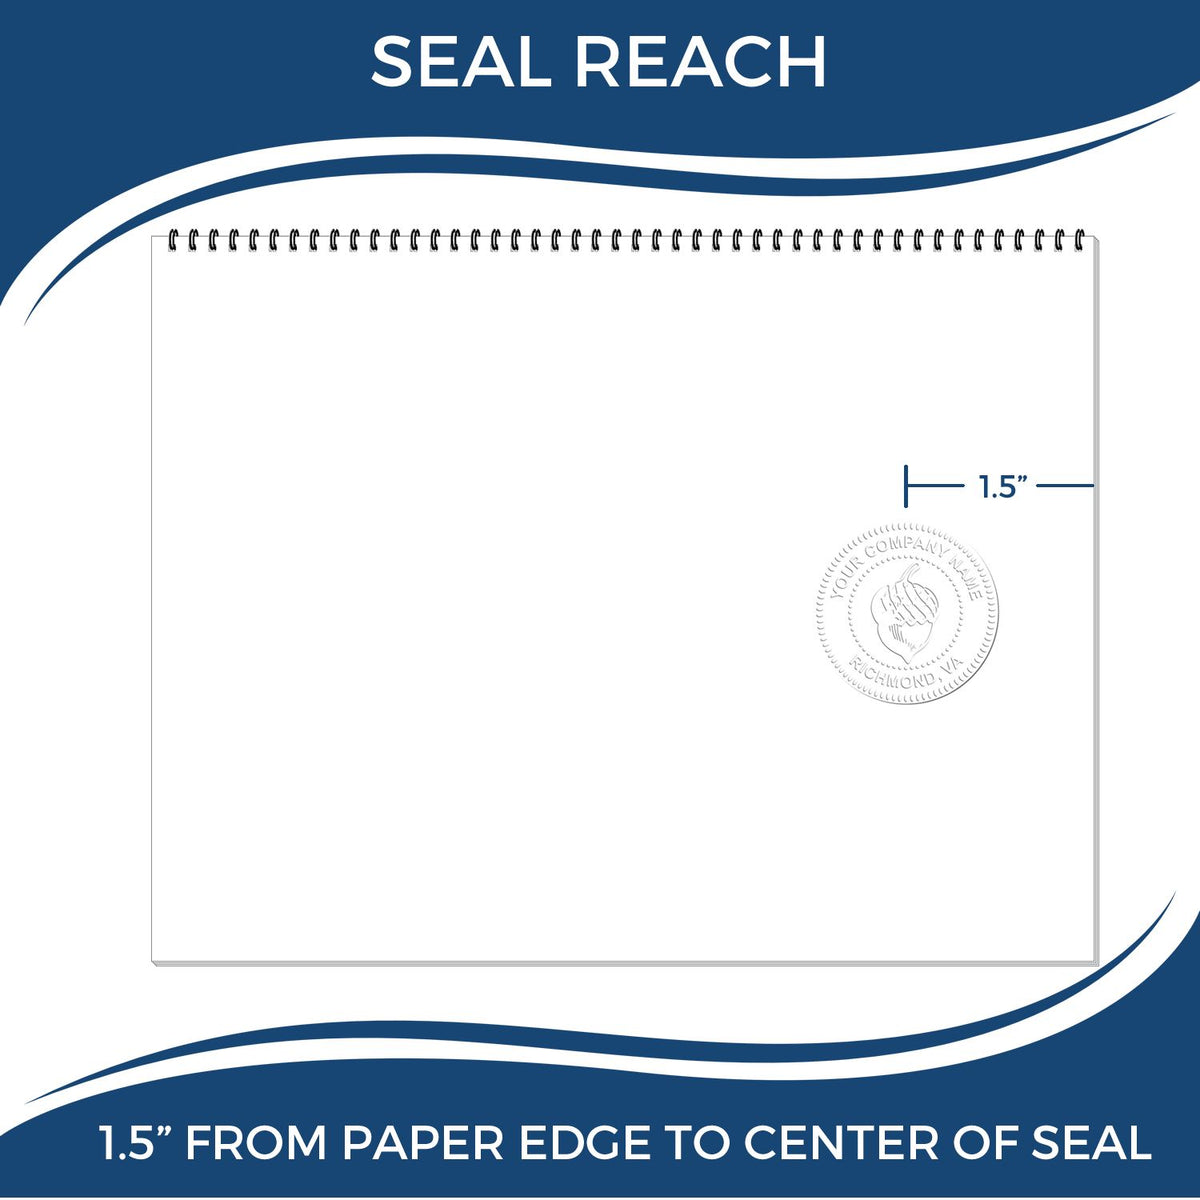 An infographic showing the seal reach which is represented by a ruler and a miniature seal image of the State of Virginia Architectural Seal Embosser